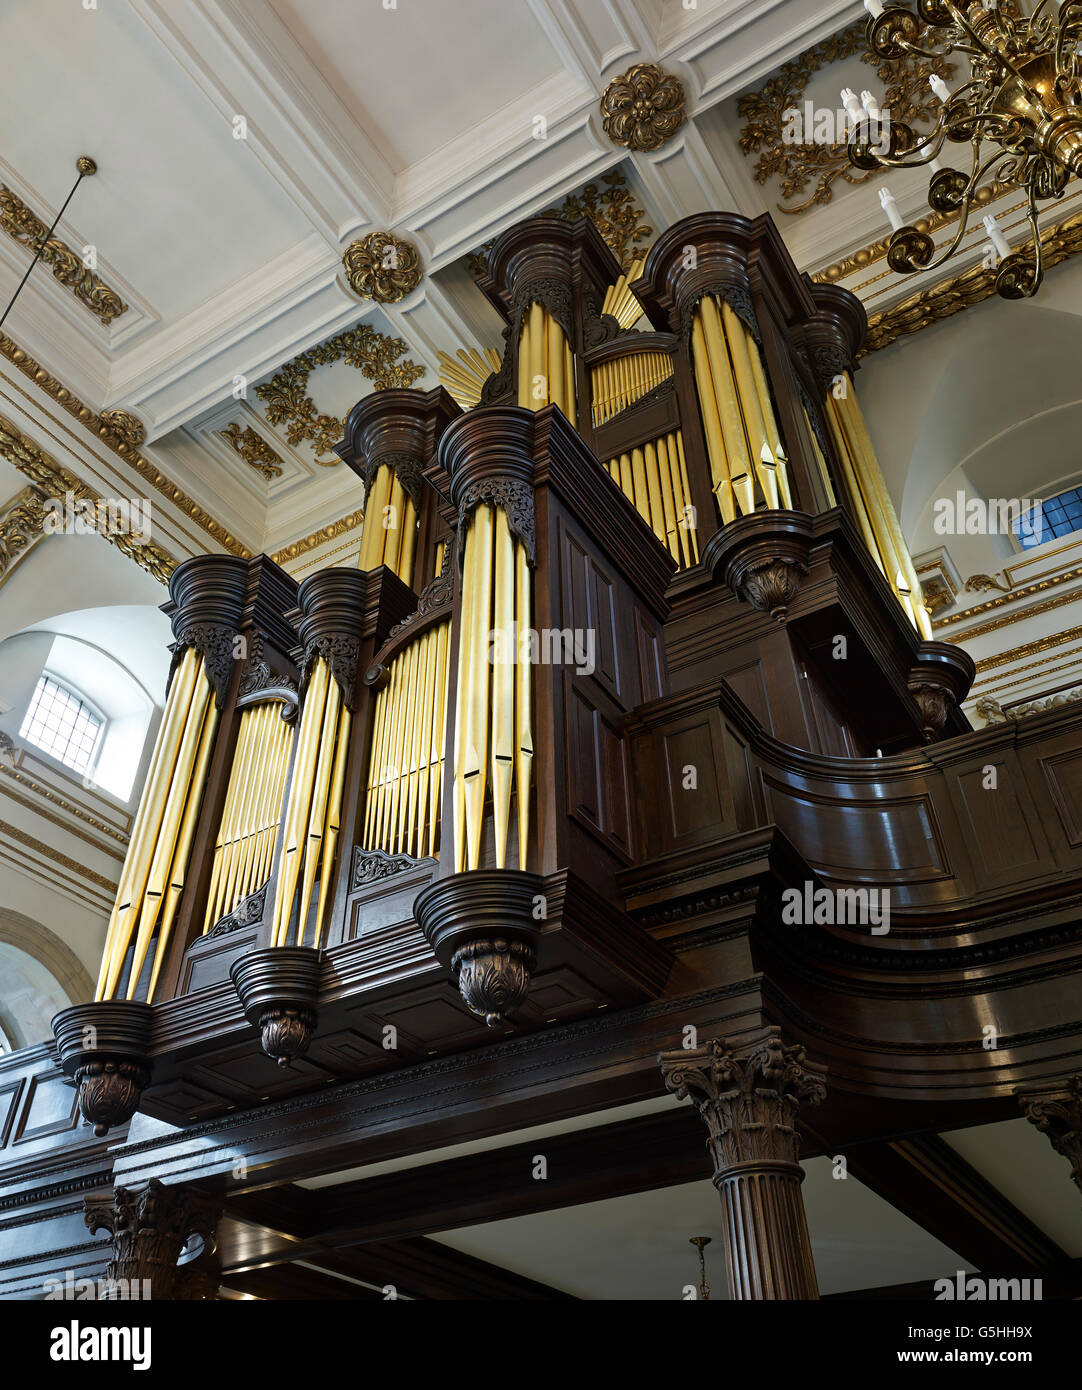 St Lawrence Jewry, church in the City of London. 2001 organ by Johannes Klais Orgelbau Stock Photo